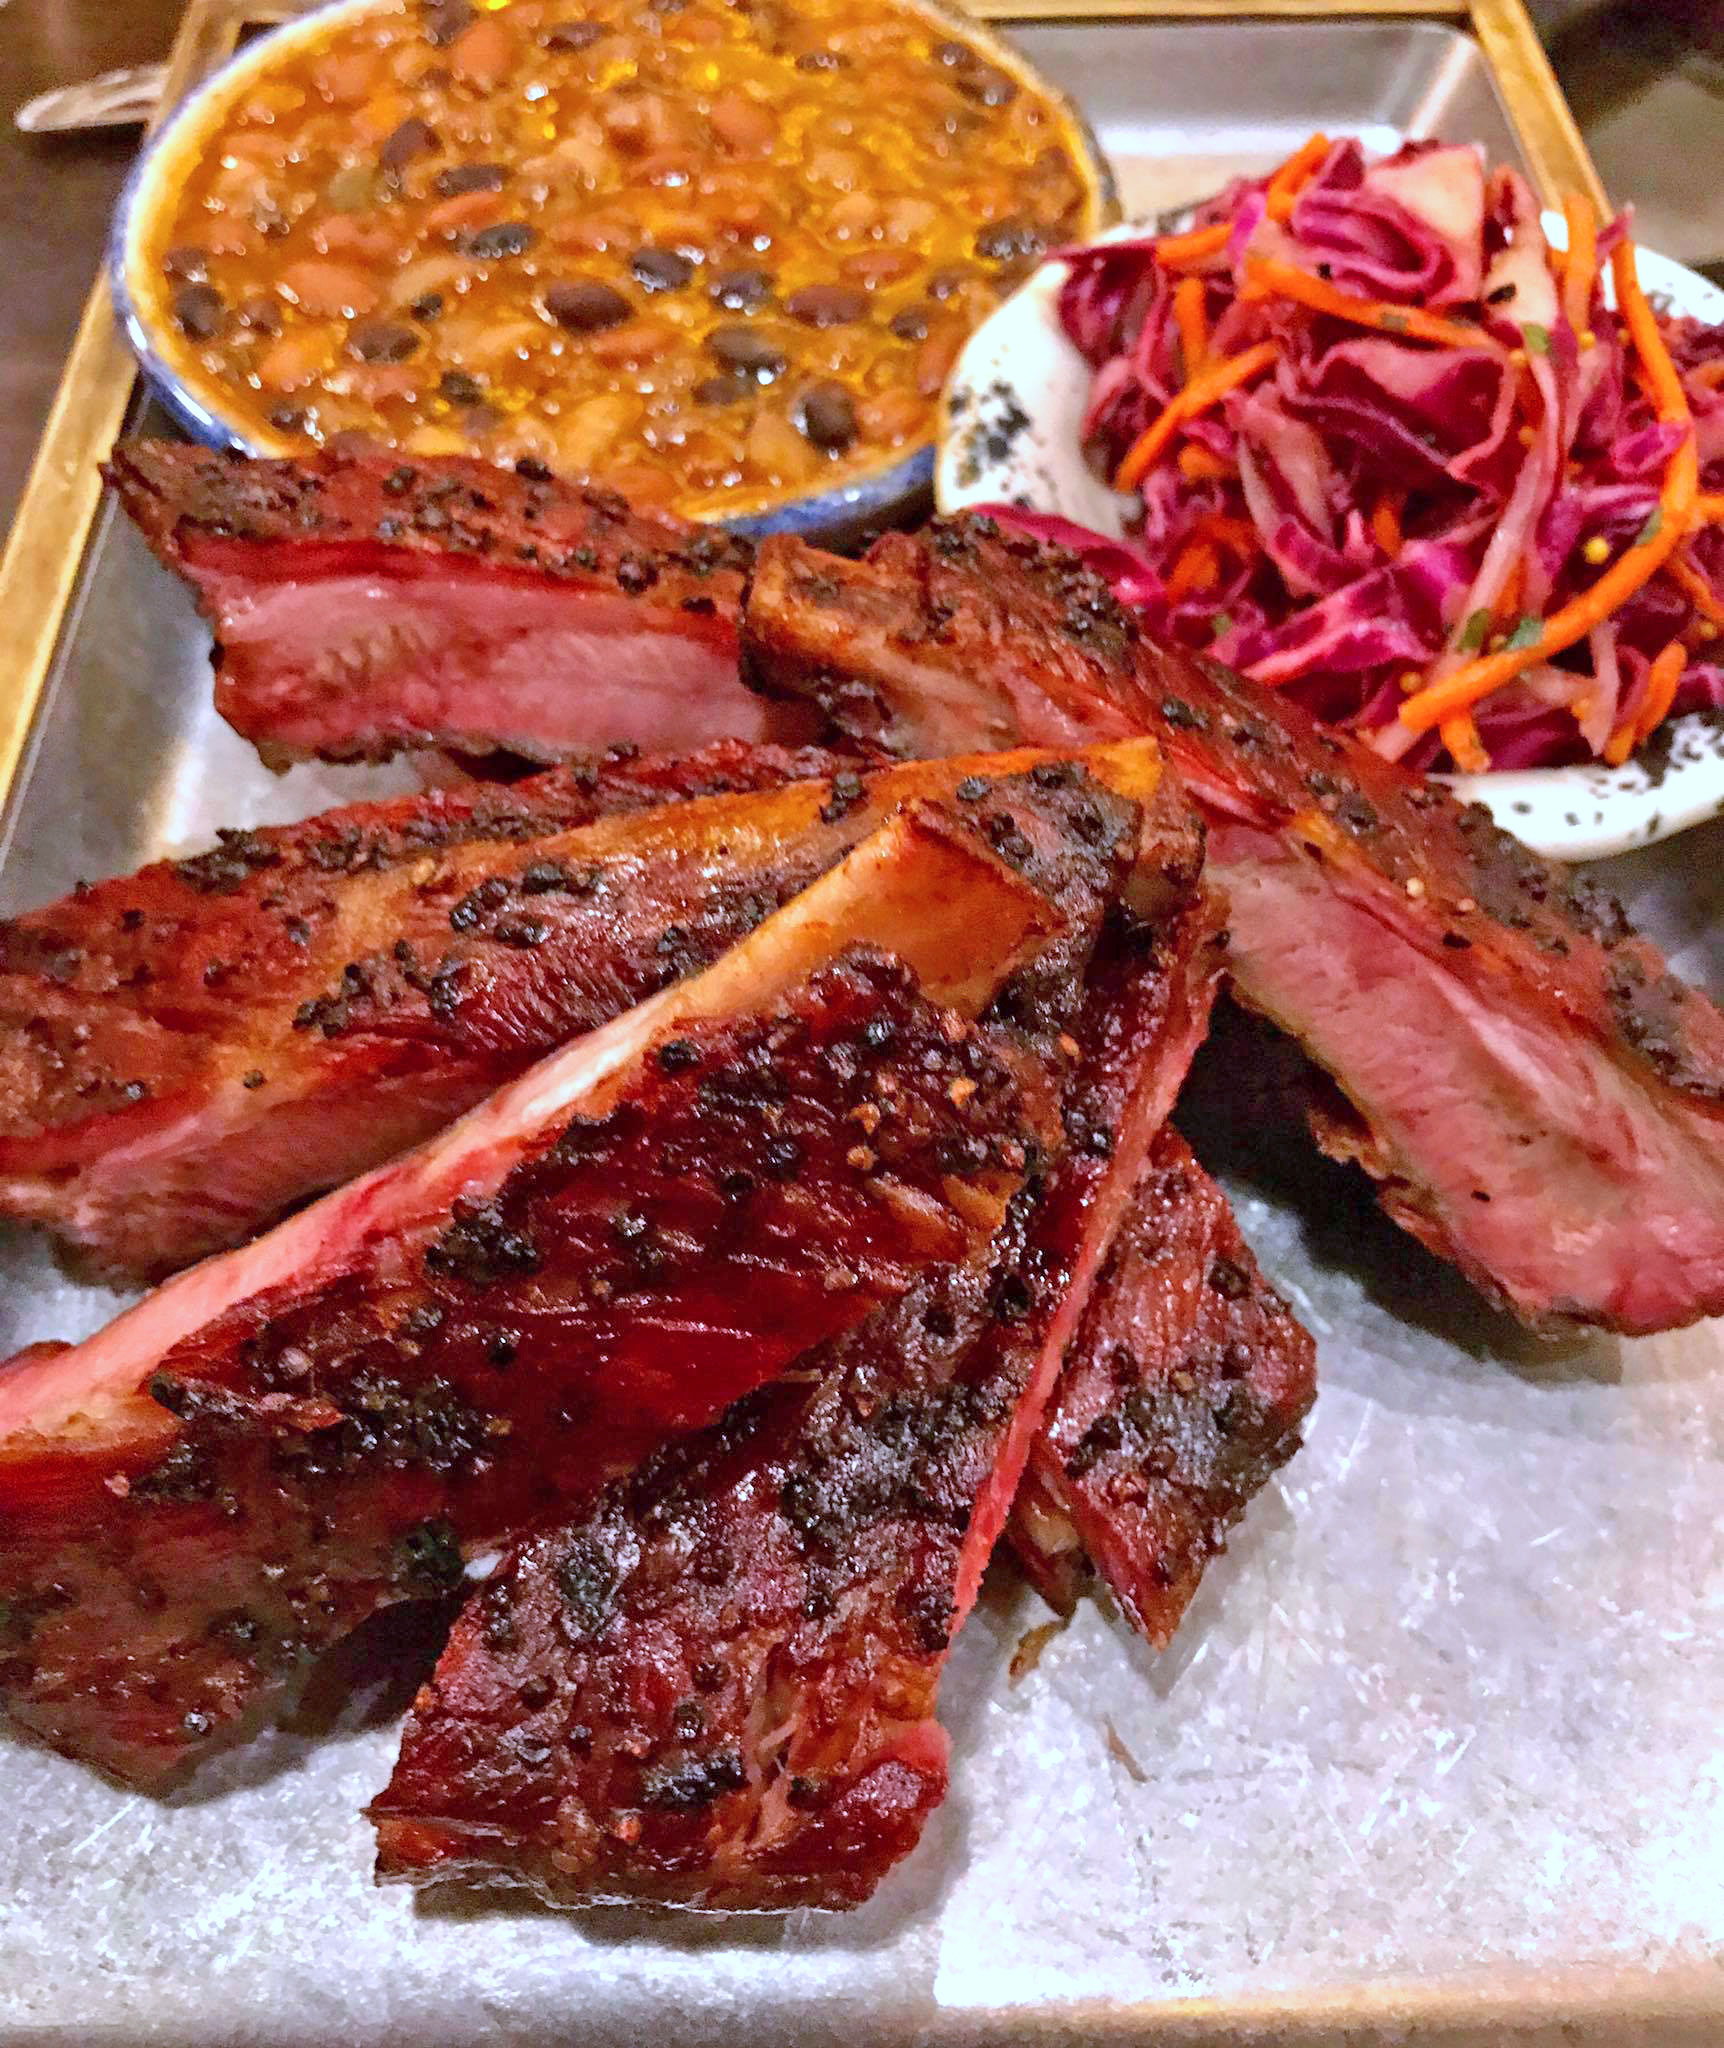 St Louis Ribs with Jack Daniels Baked Beans and Purple Slaw